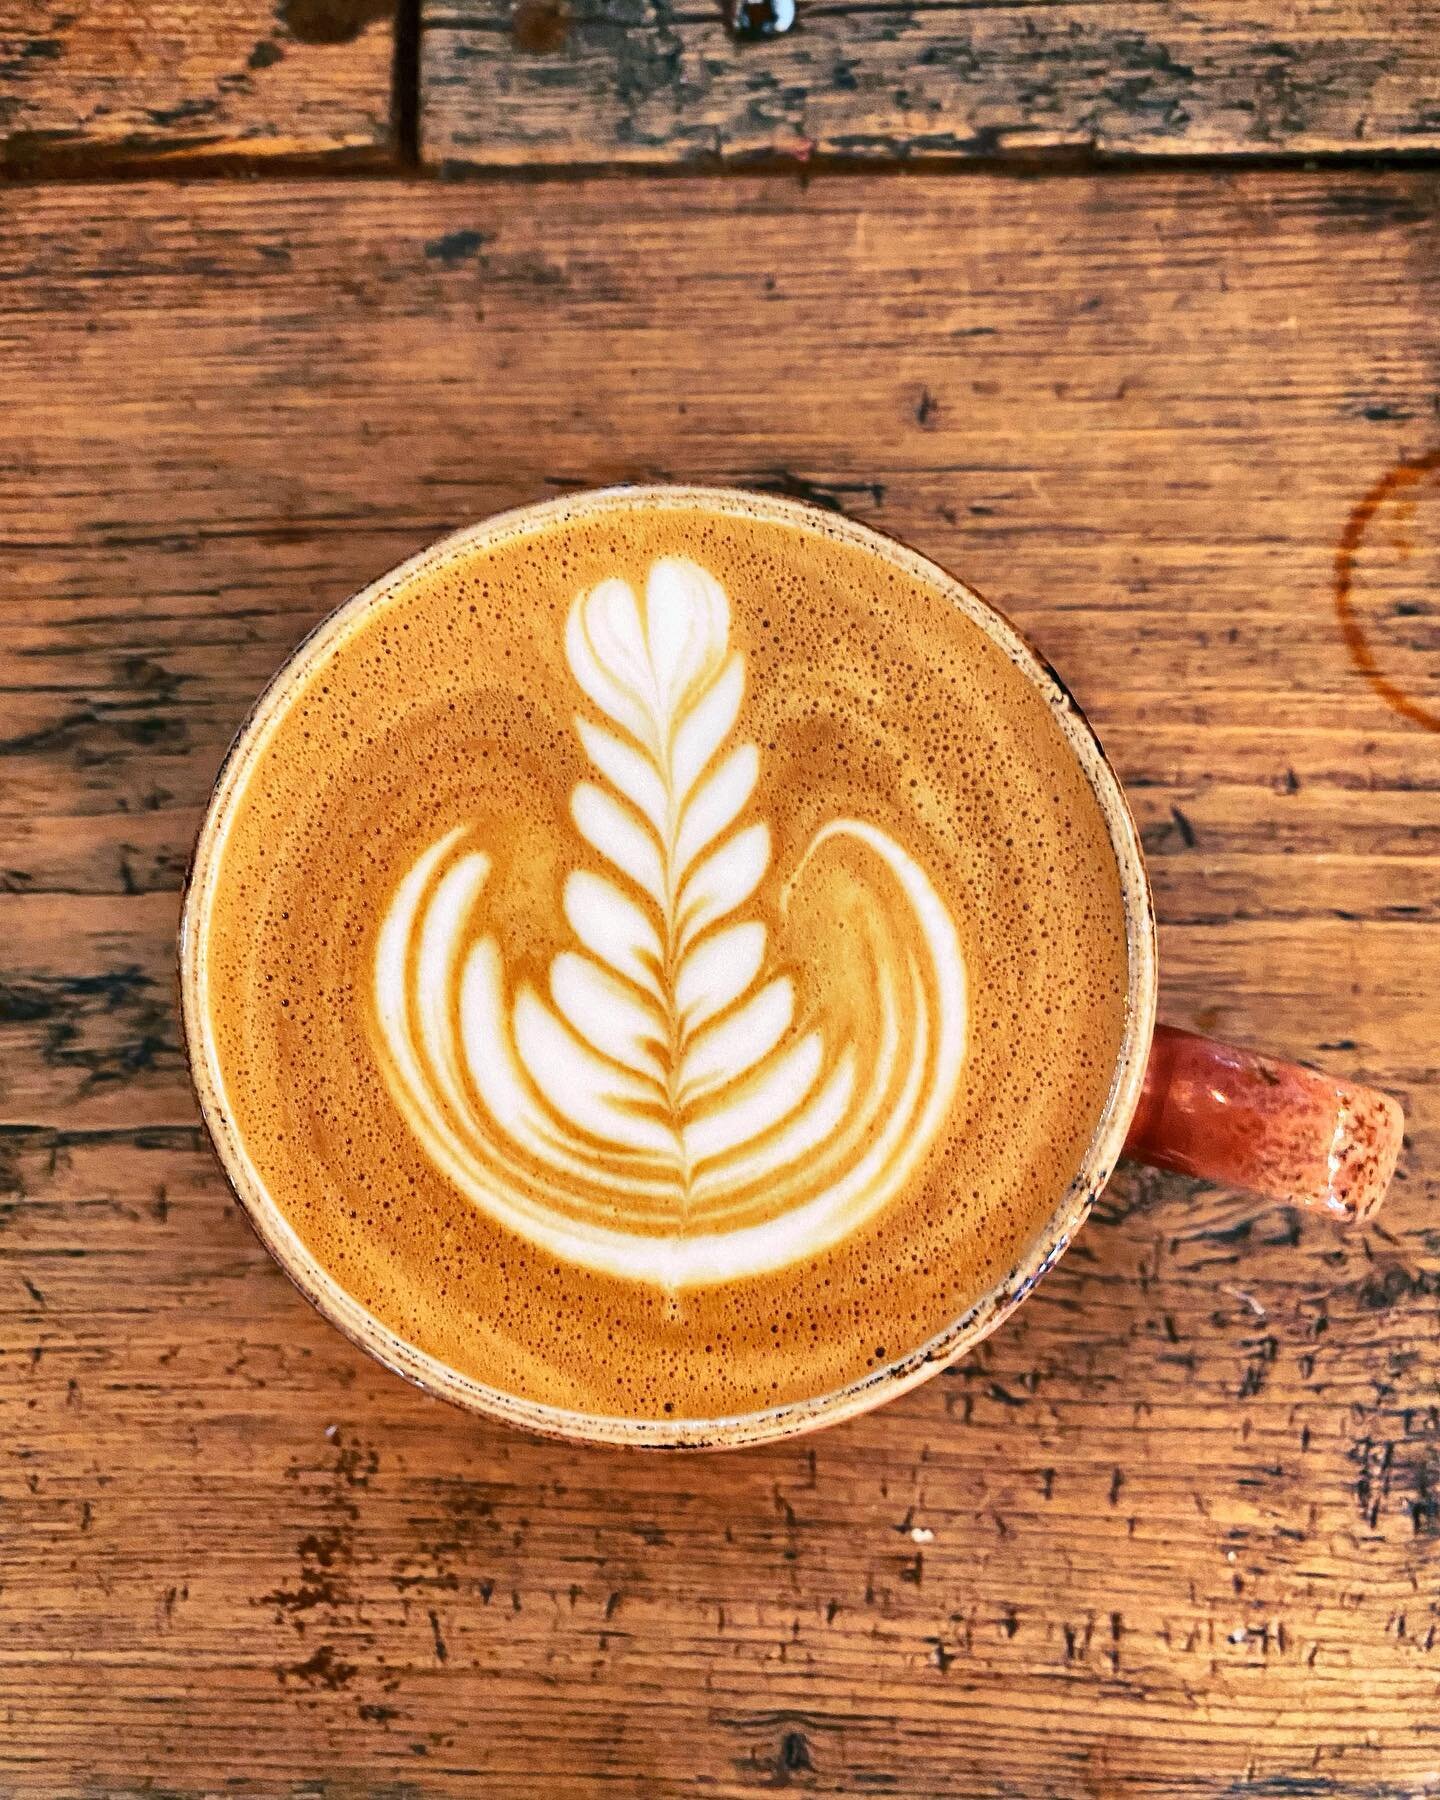 Flat White Kinda Day?
&bull;
Escape the grey weather with a hot cuppa and some sweet treats! We&rsquo;re open till 3:30pm☕️
&bull;
#theorchardcoffeeandco #latte #bristol #barista #hot #coffeeshop #flatwhite #latteart